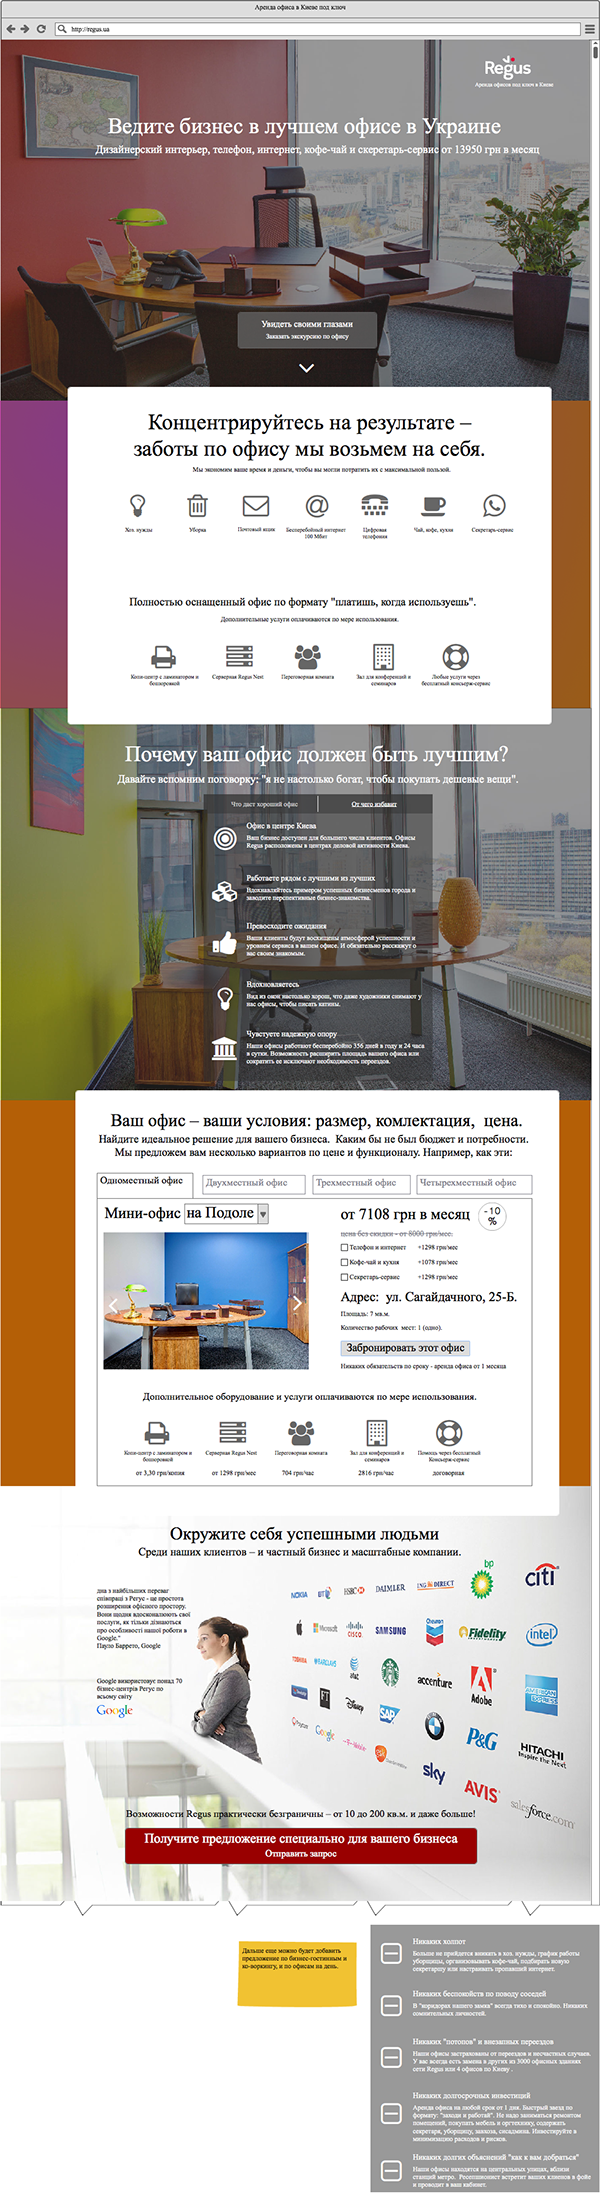 Landing page for Regus office service branch wireframe